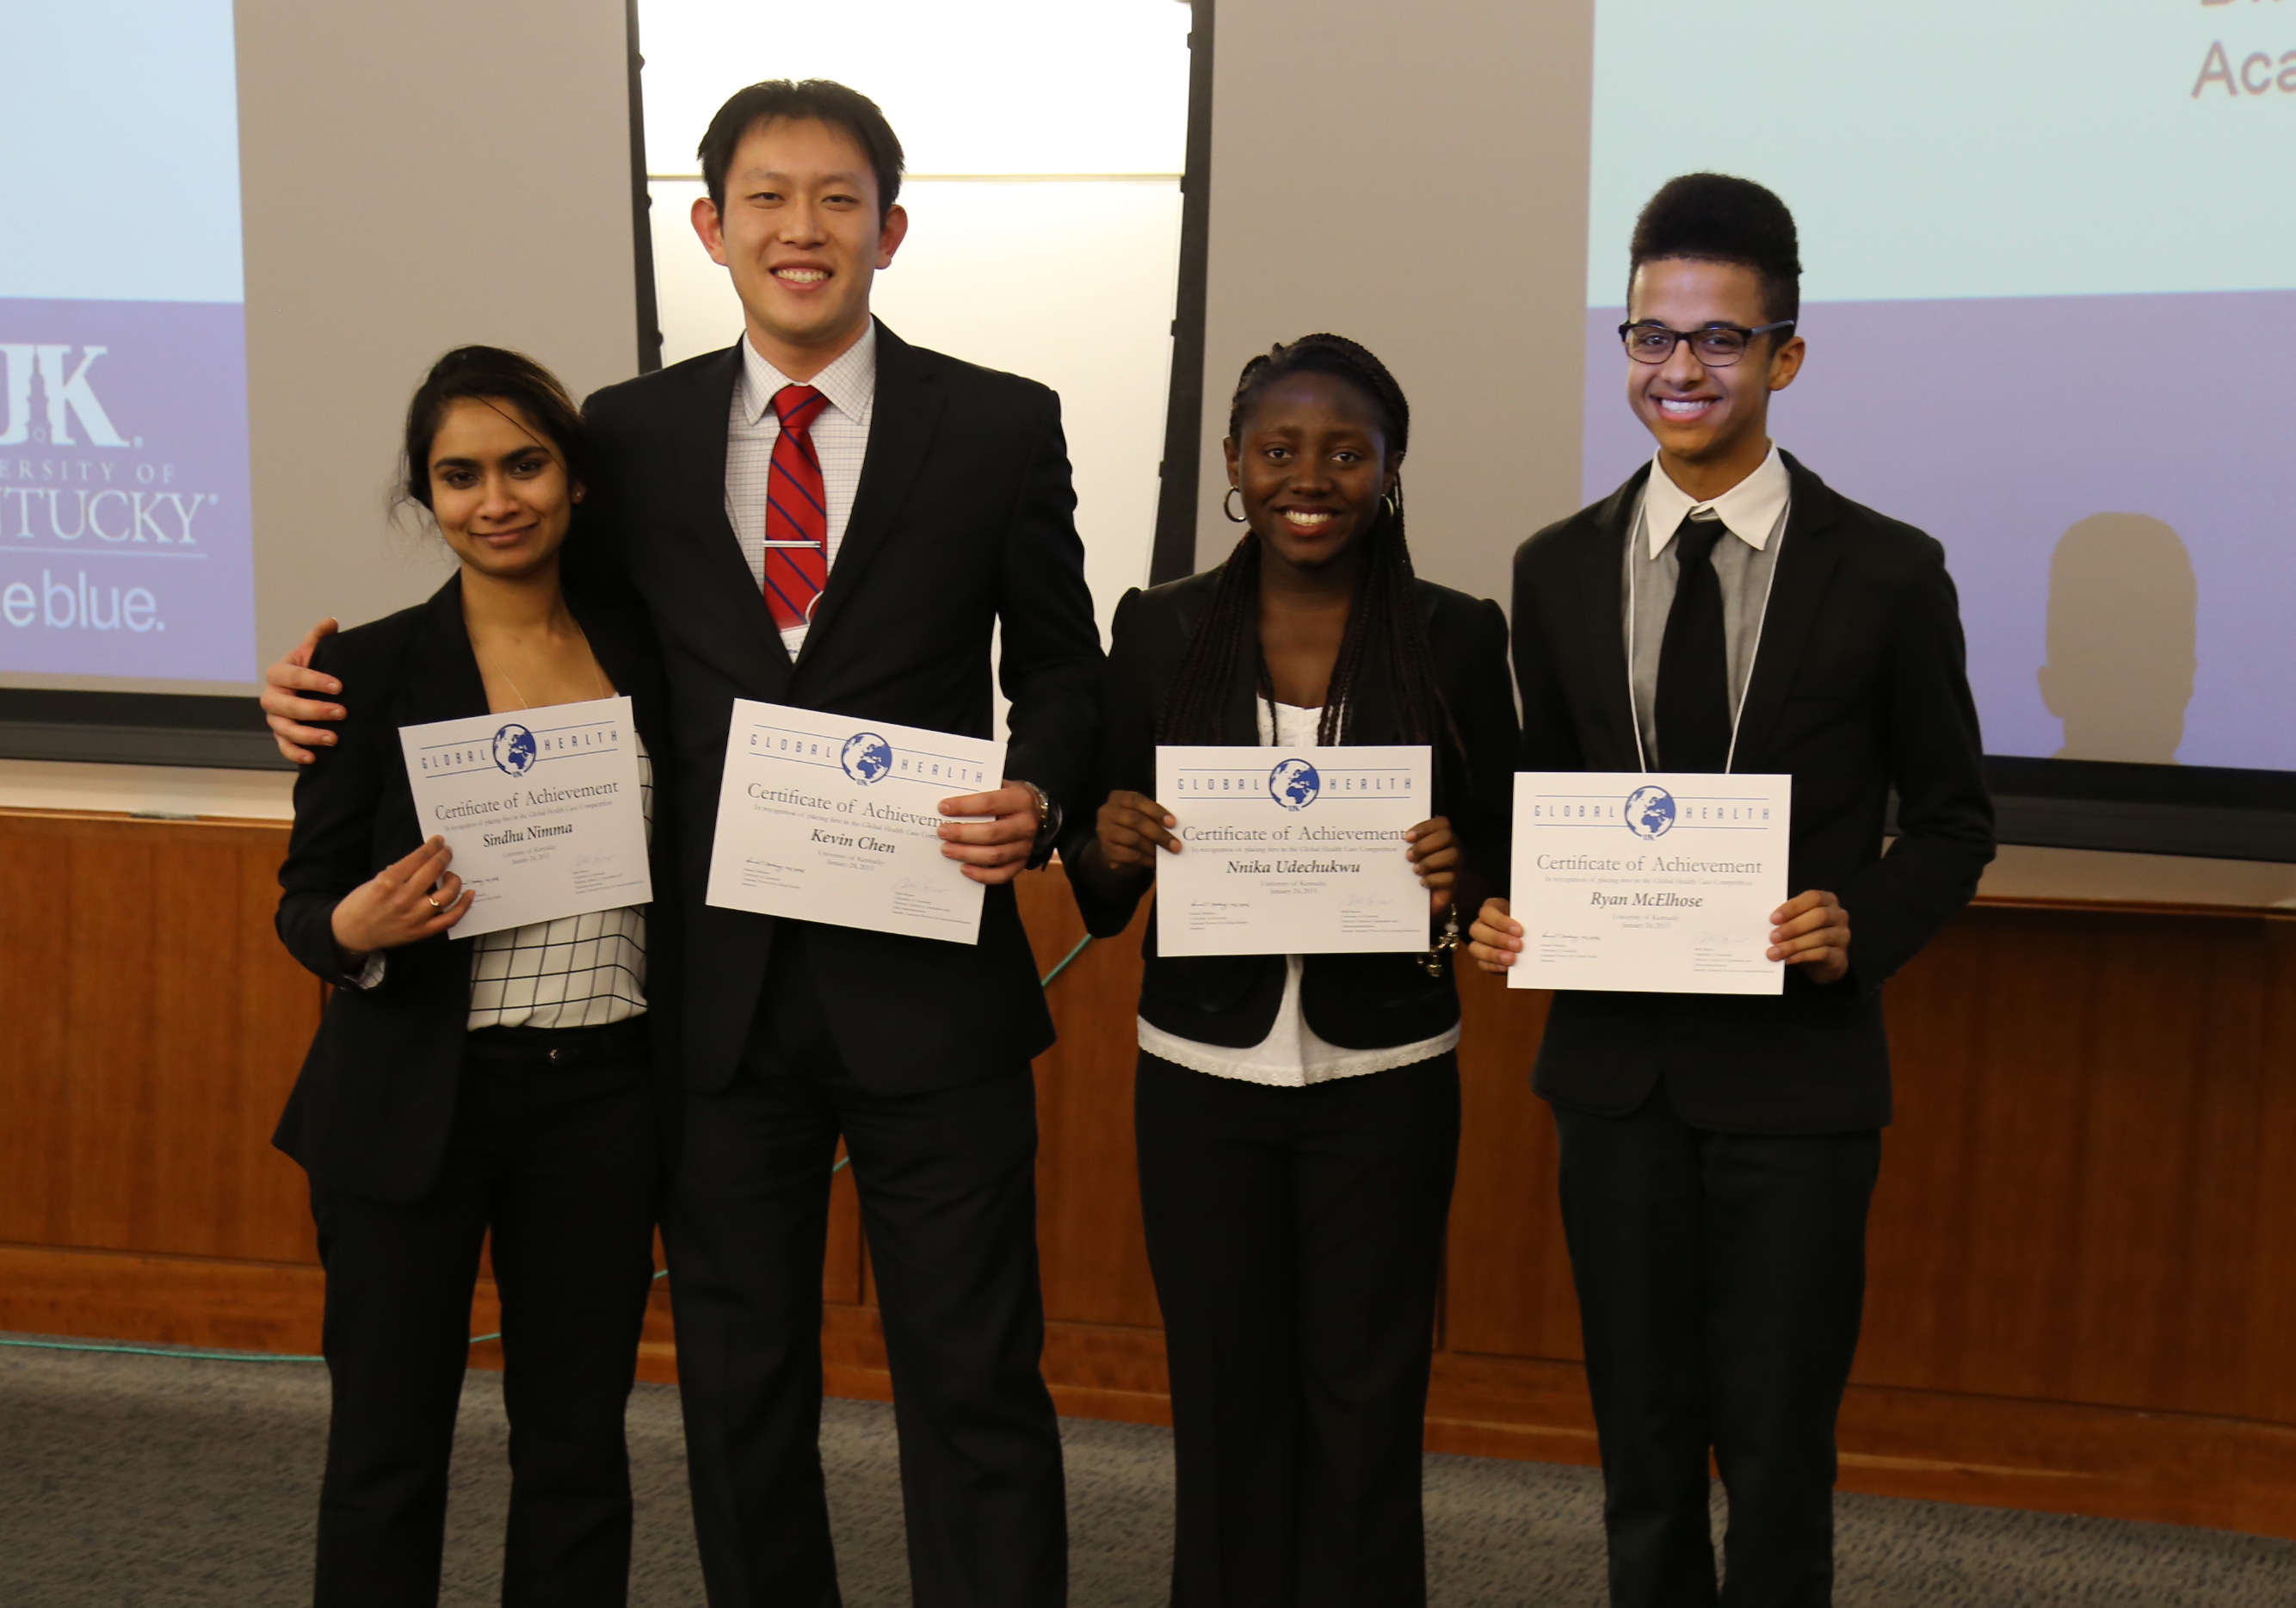 The winning team at the Global Health Case Competition